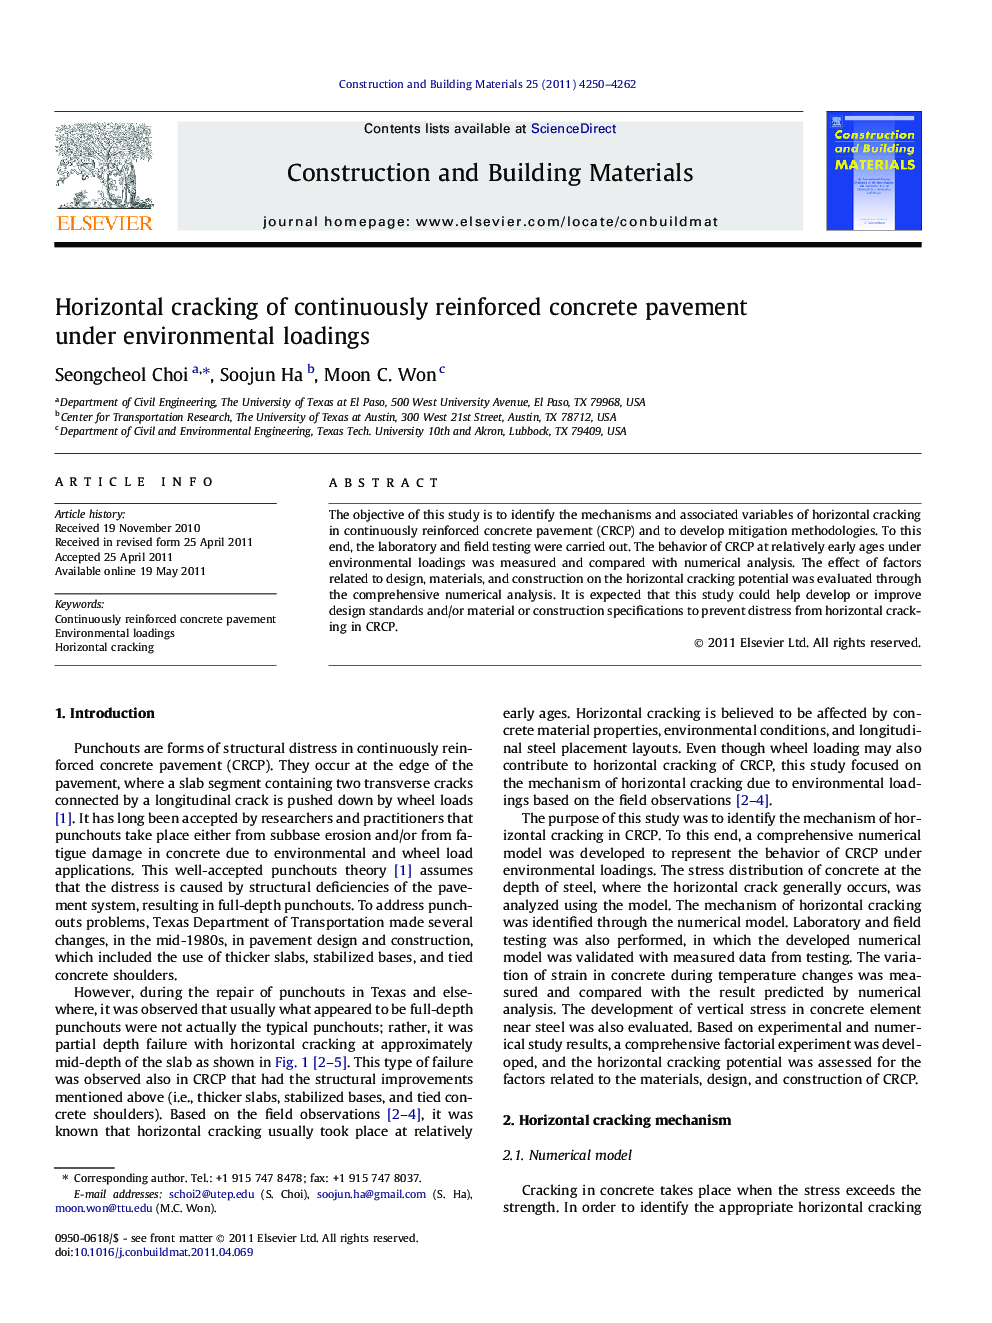 Horizontal cracking of continuously reinforced concrete pavement under environmental loadings